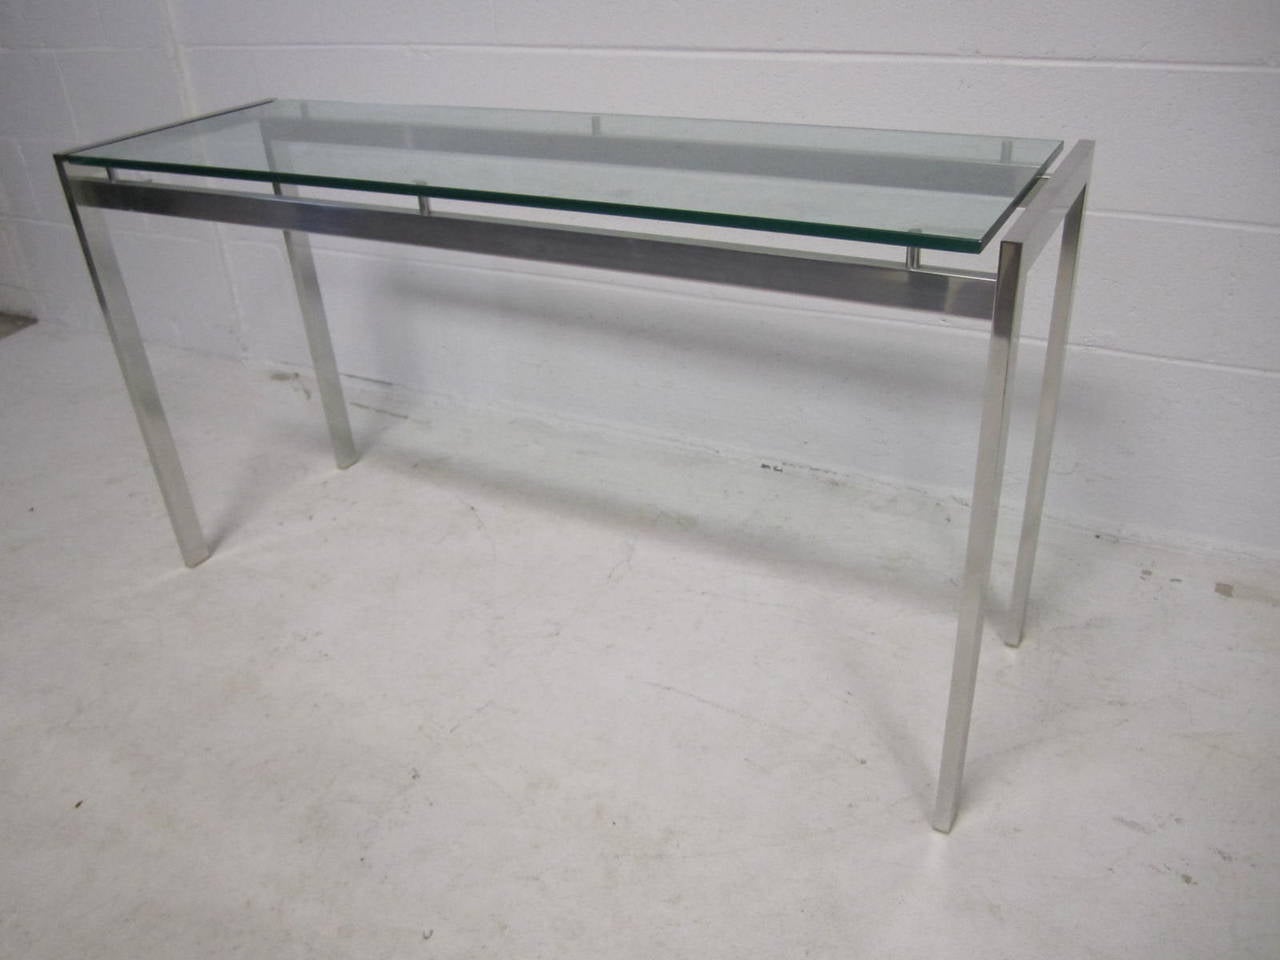 Super sexy polished aluminum long console table.